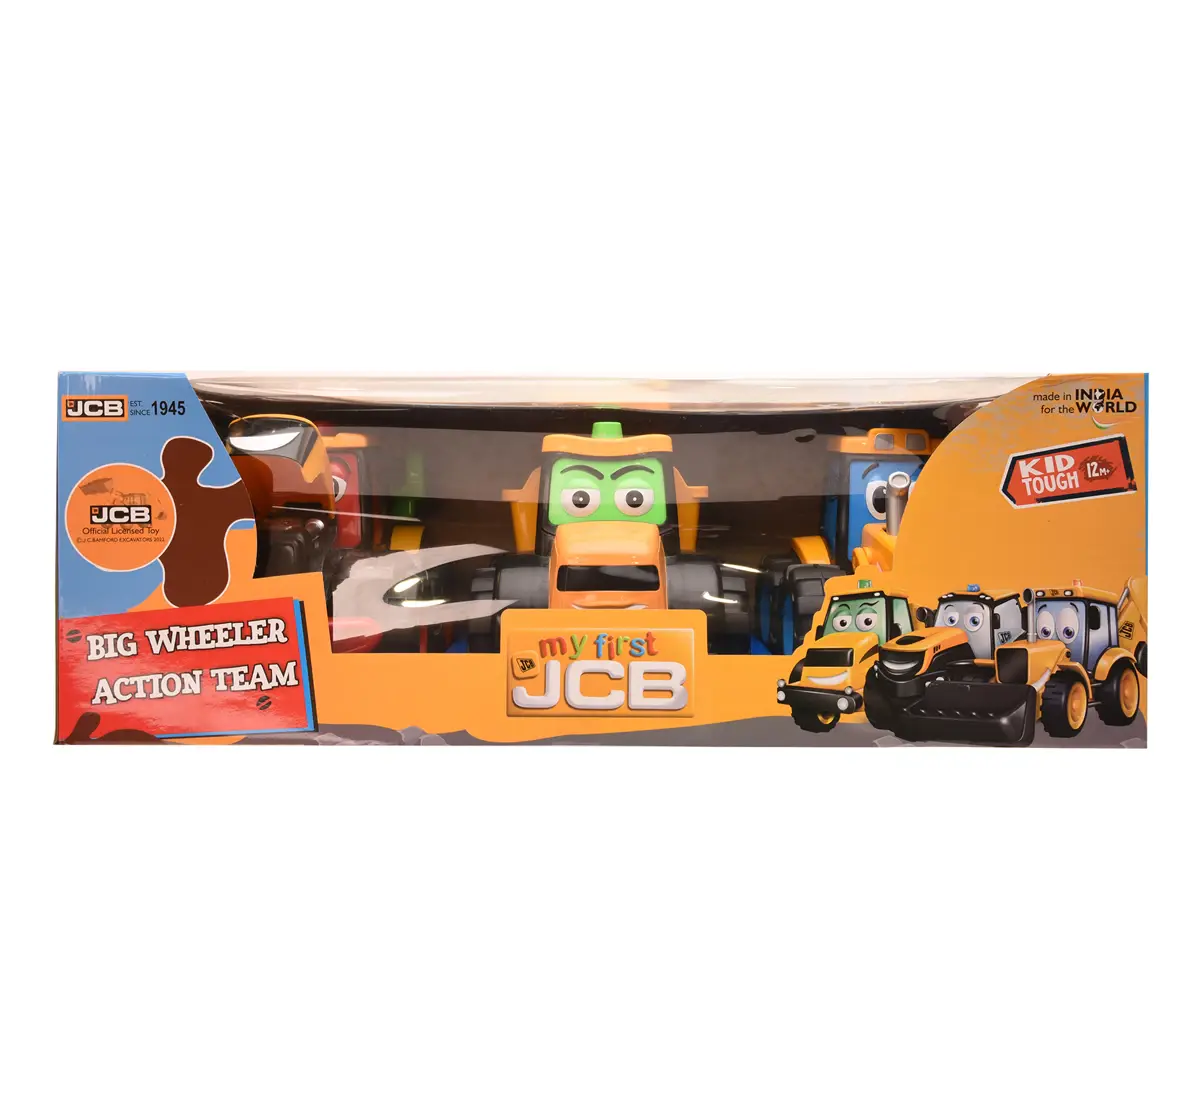 JCB My First Big Wheeler Action Team Construction Toys for kids 12M+, Multicolour